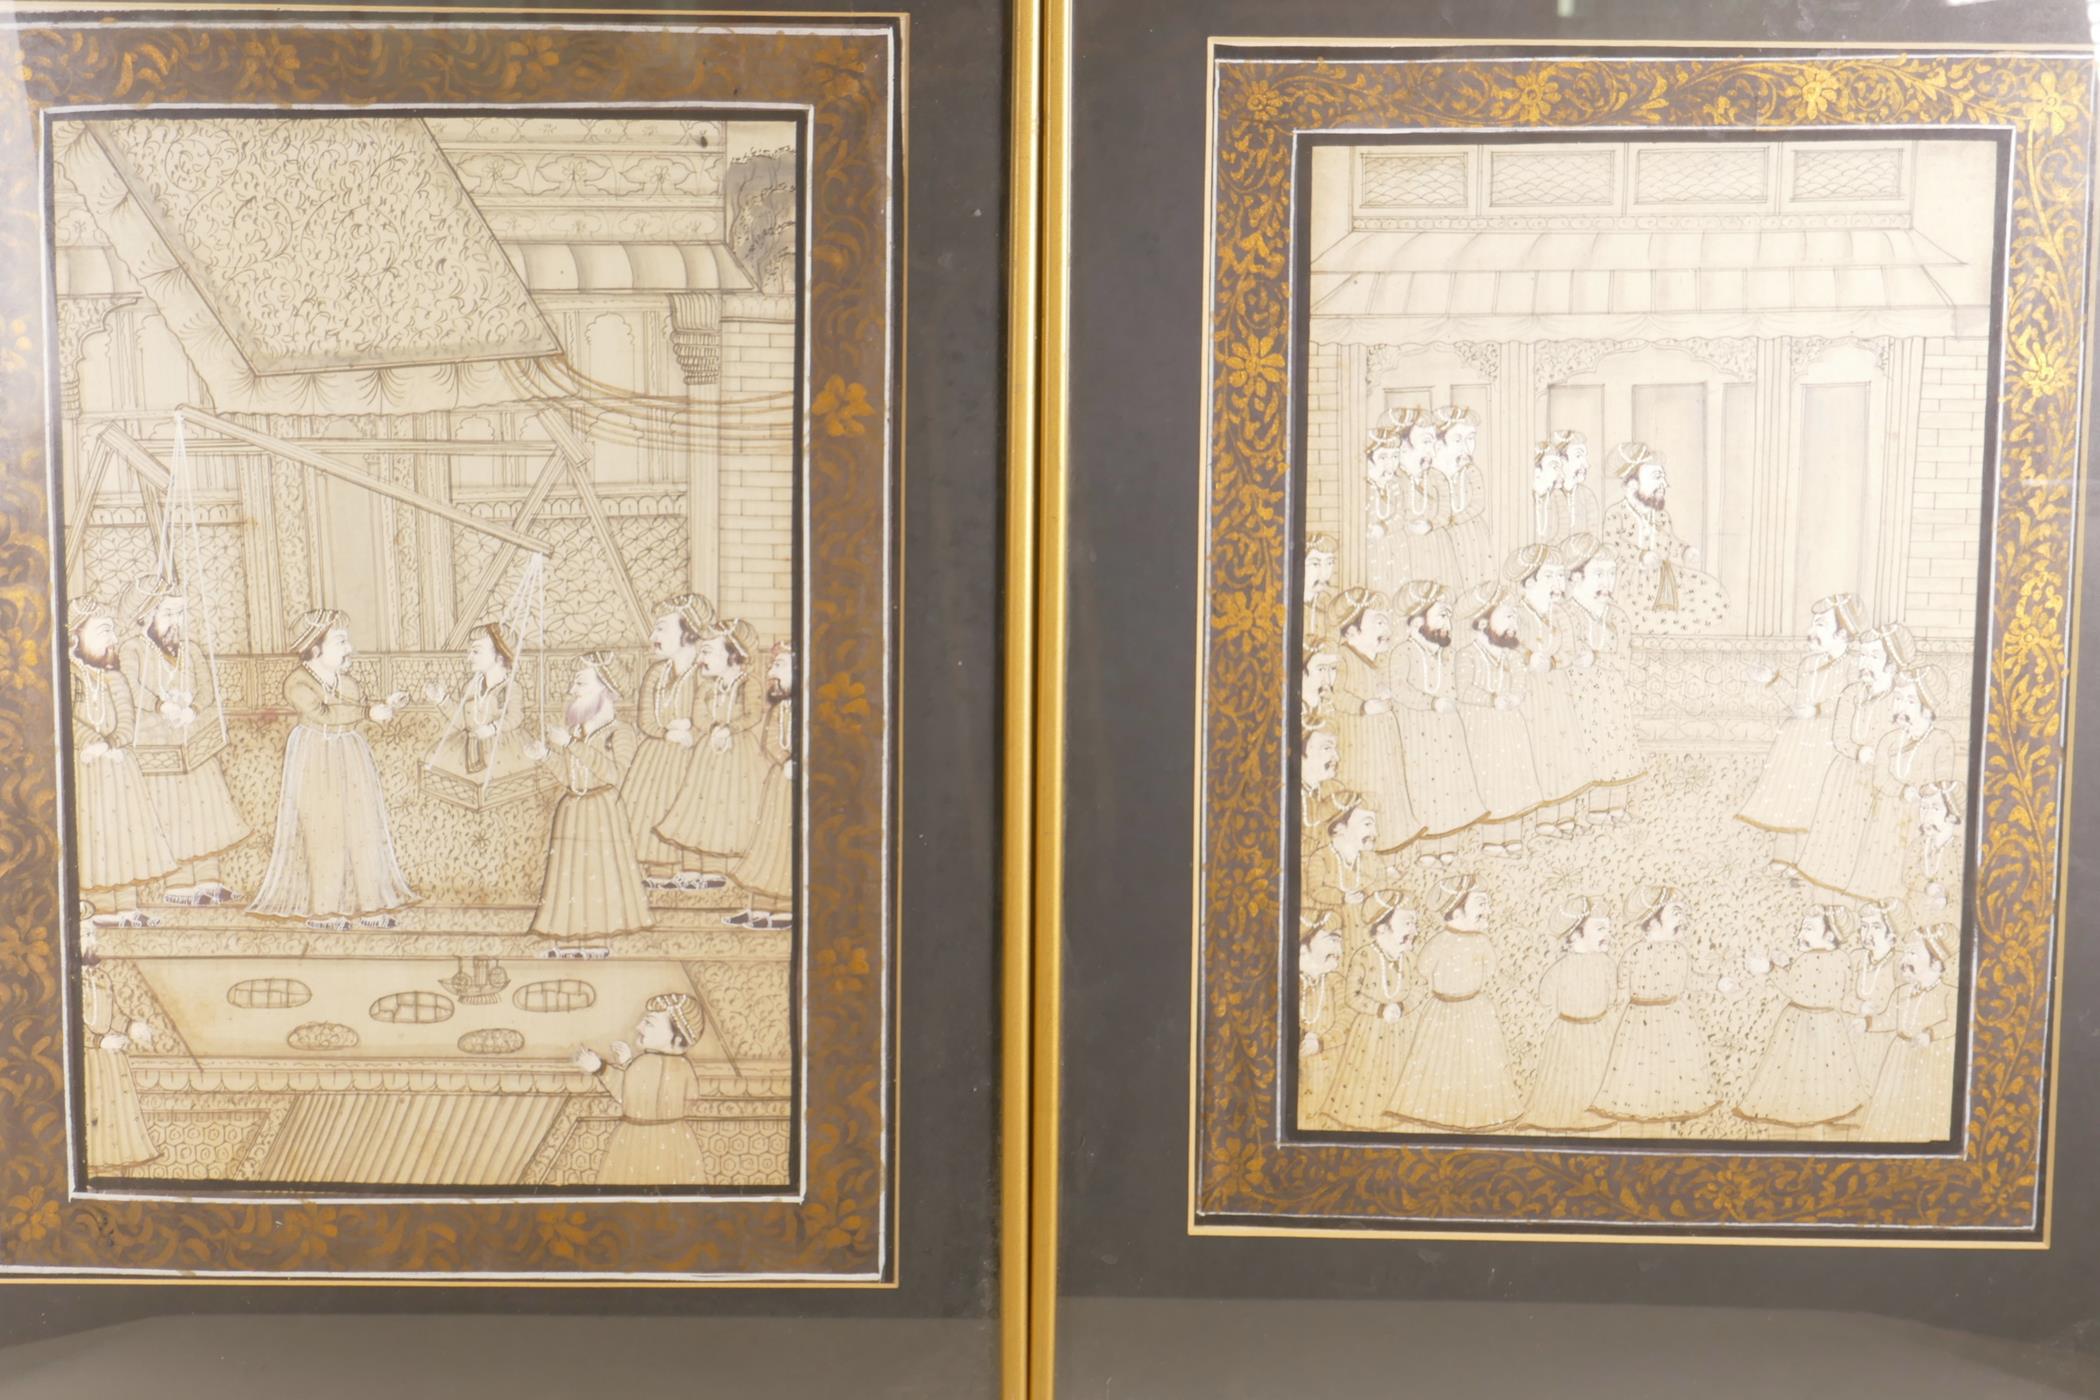 A pair of Indian miniature paintings on silk depicting court scenes, 10" x 15"